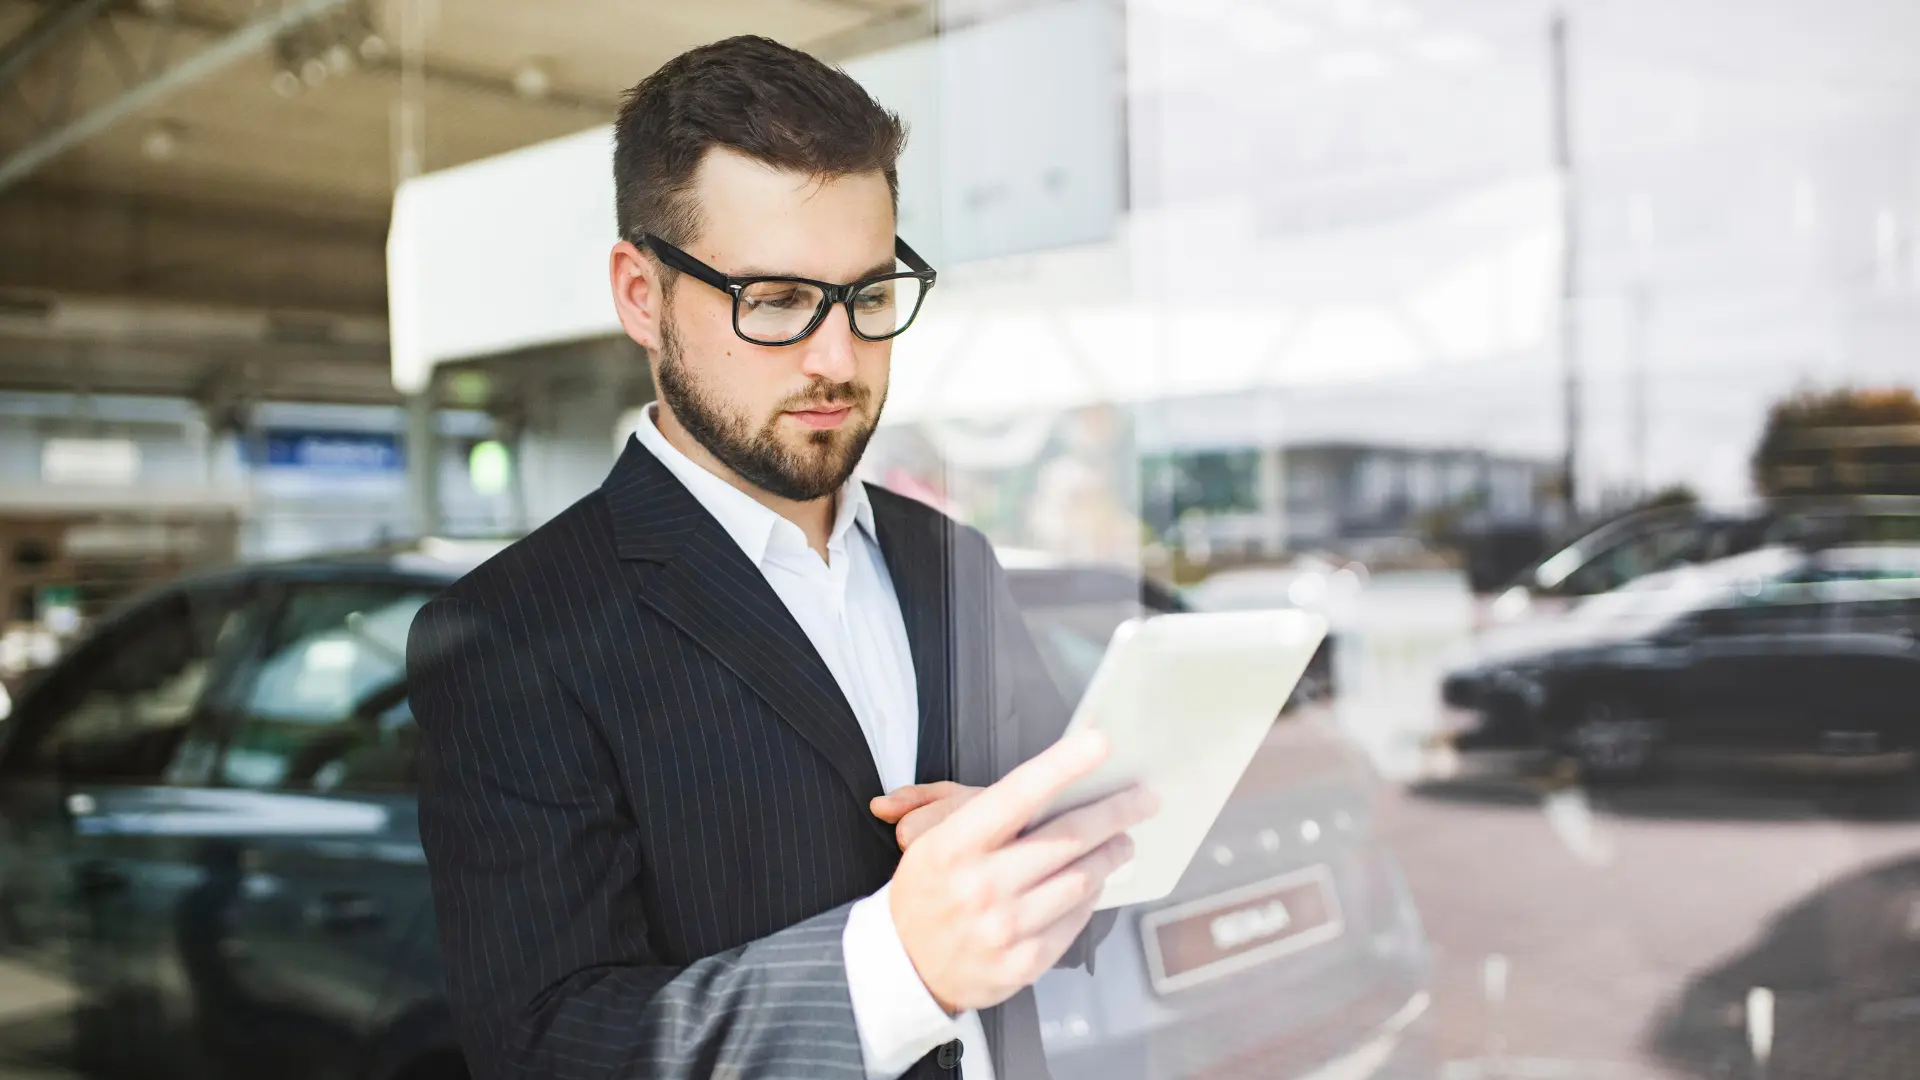 How to Start an Automotive Dealership